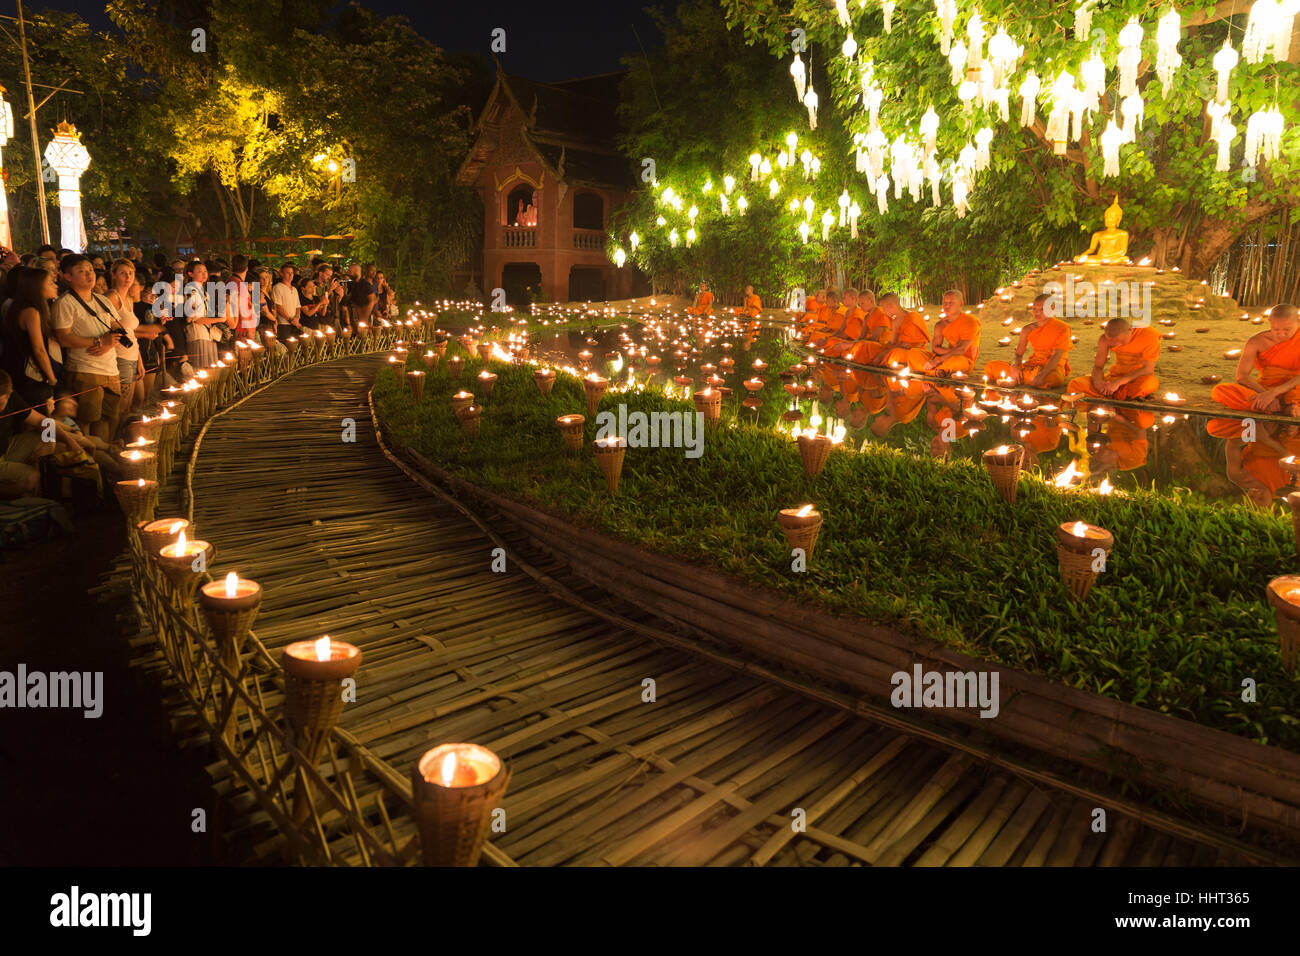 Chiang Mai, Thailand - November 14, 2016: buddhist monk sitting at waterside with candle light in Yeepeng festival at Puntao temple in Chiang Mai, Tha Stock Photo